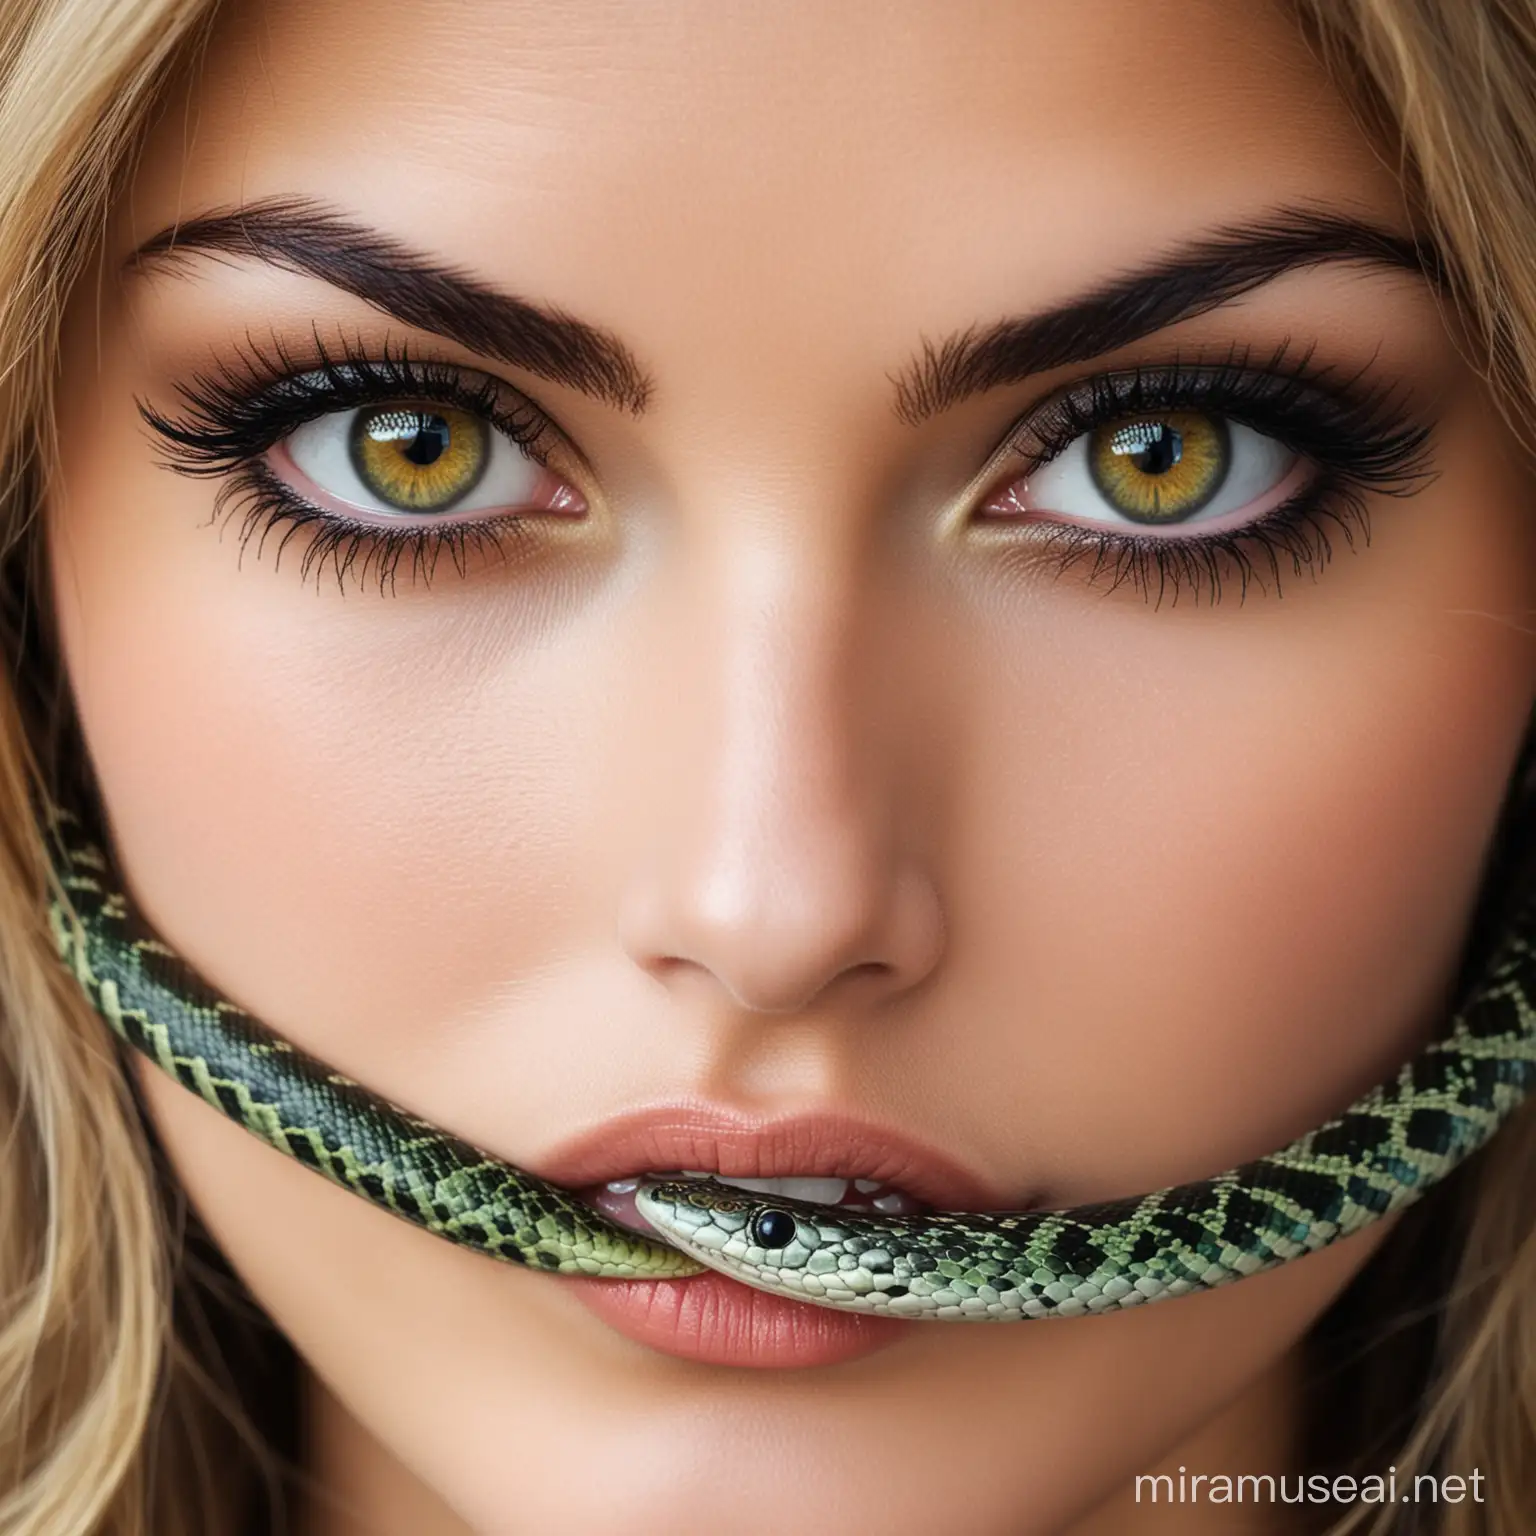 beautiful woman with snake eyes
